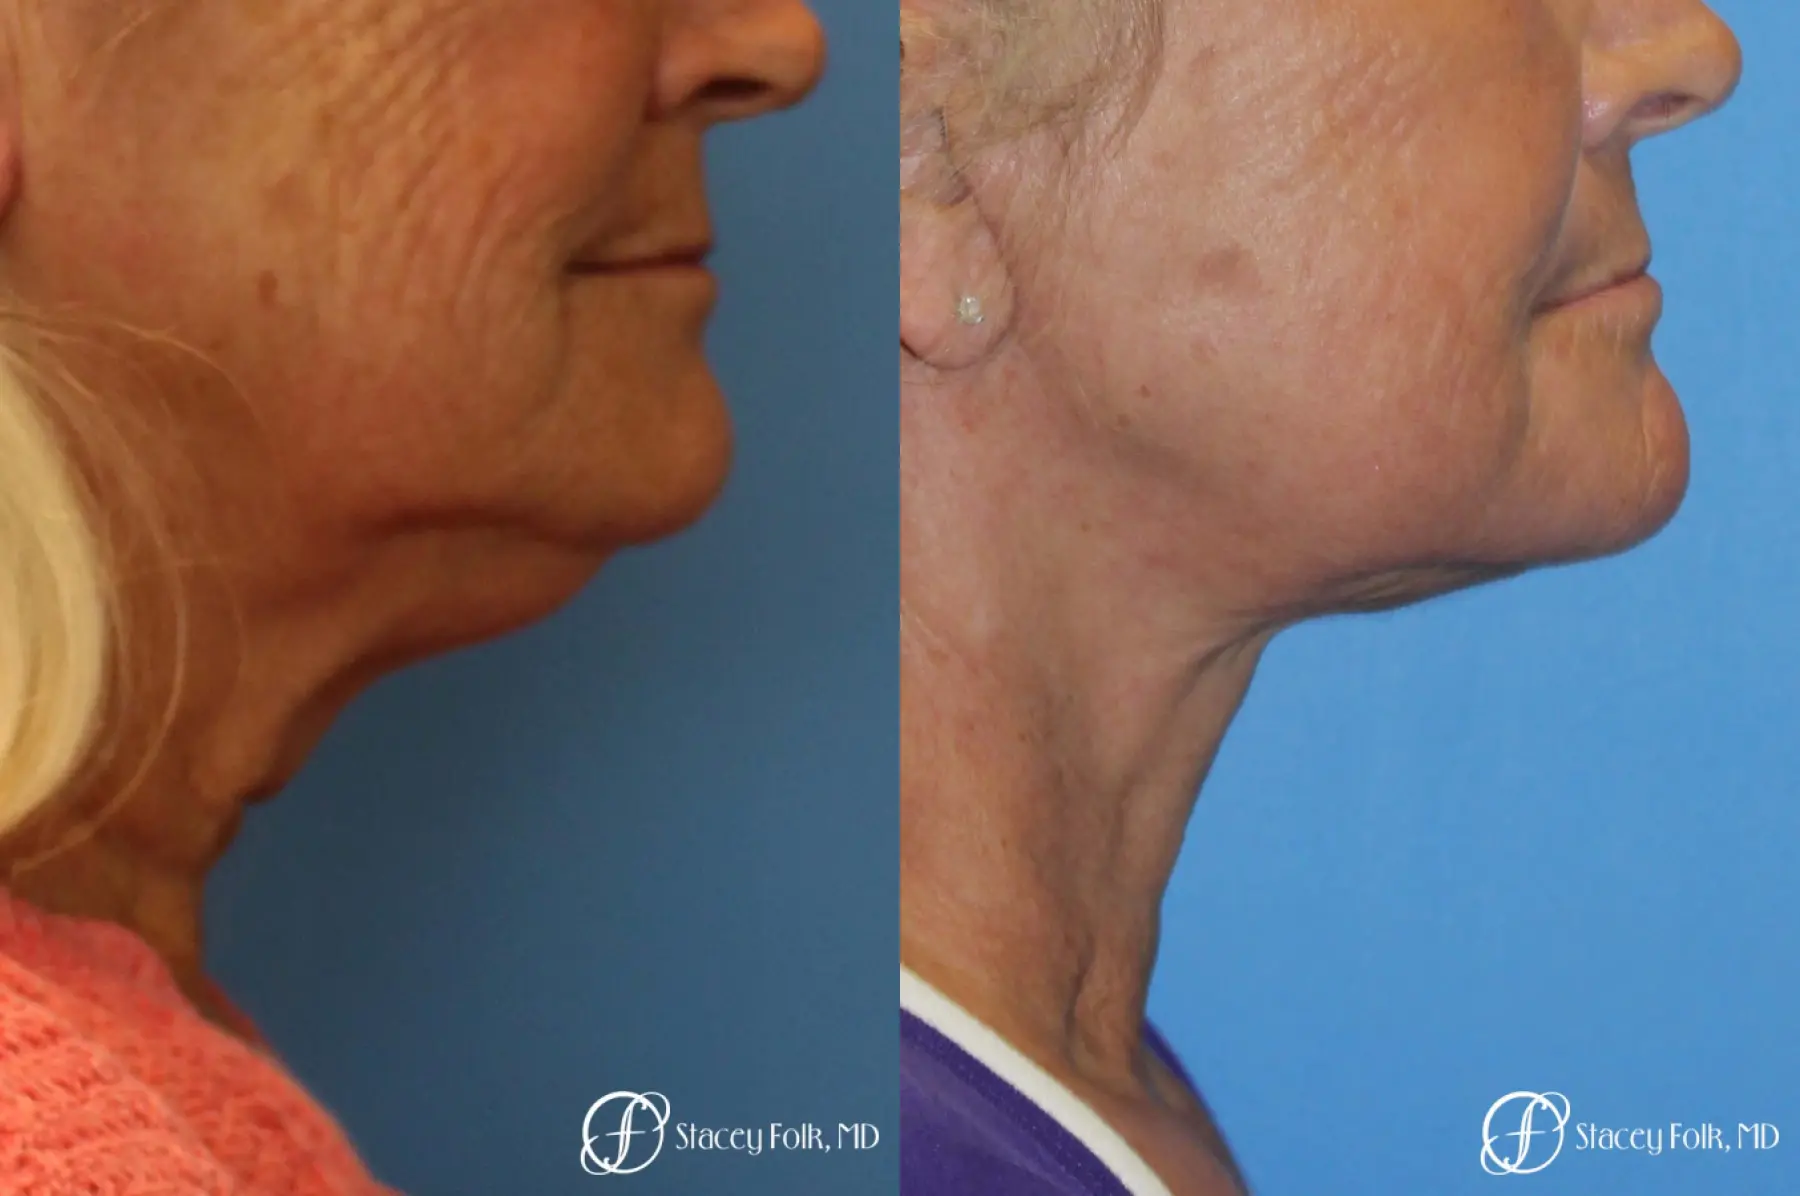 Facelift and Laser - Before and After 1